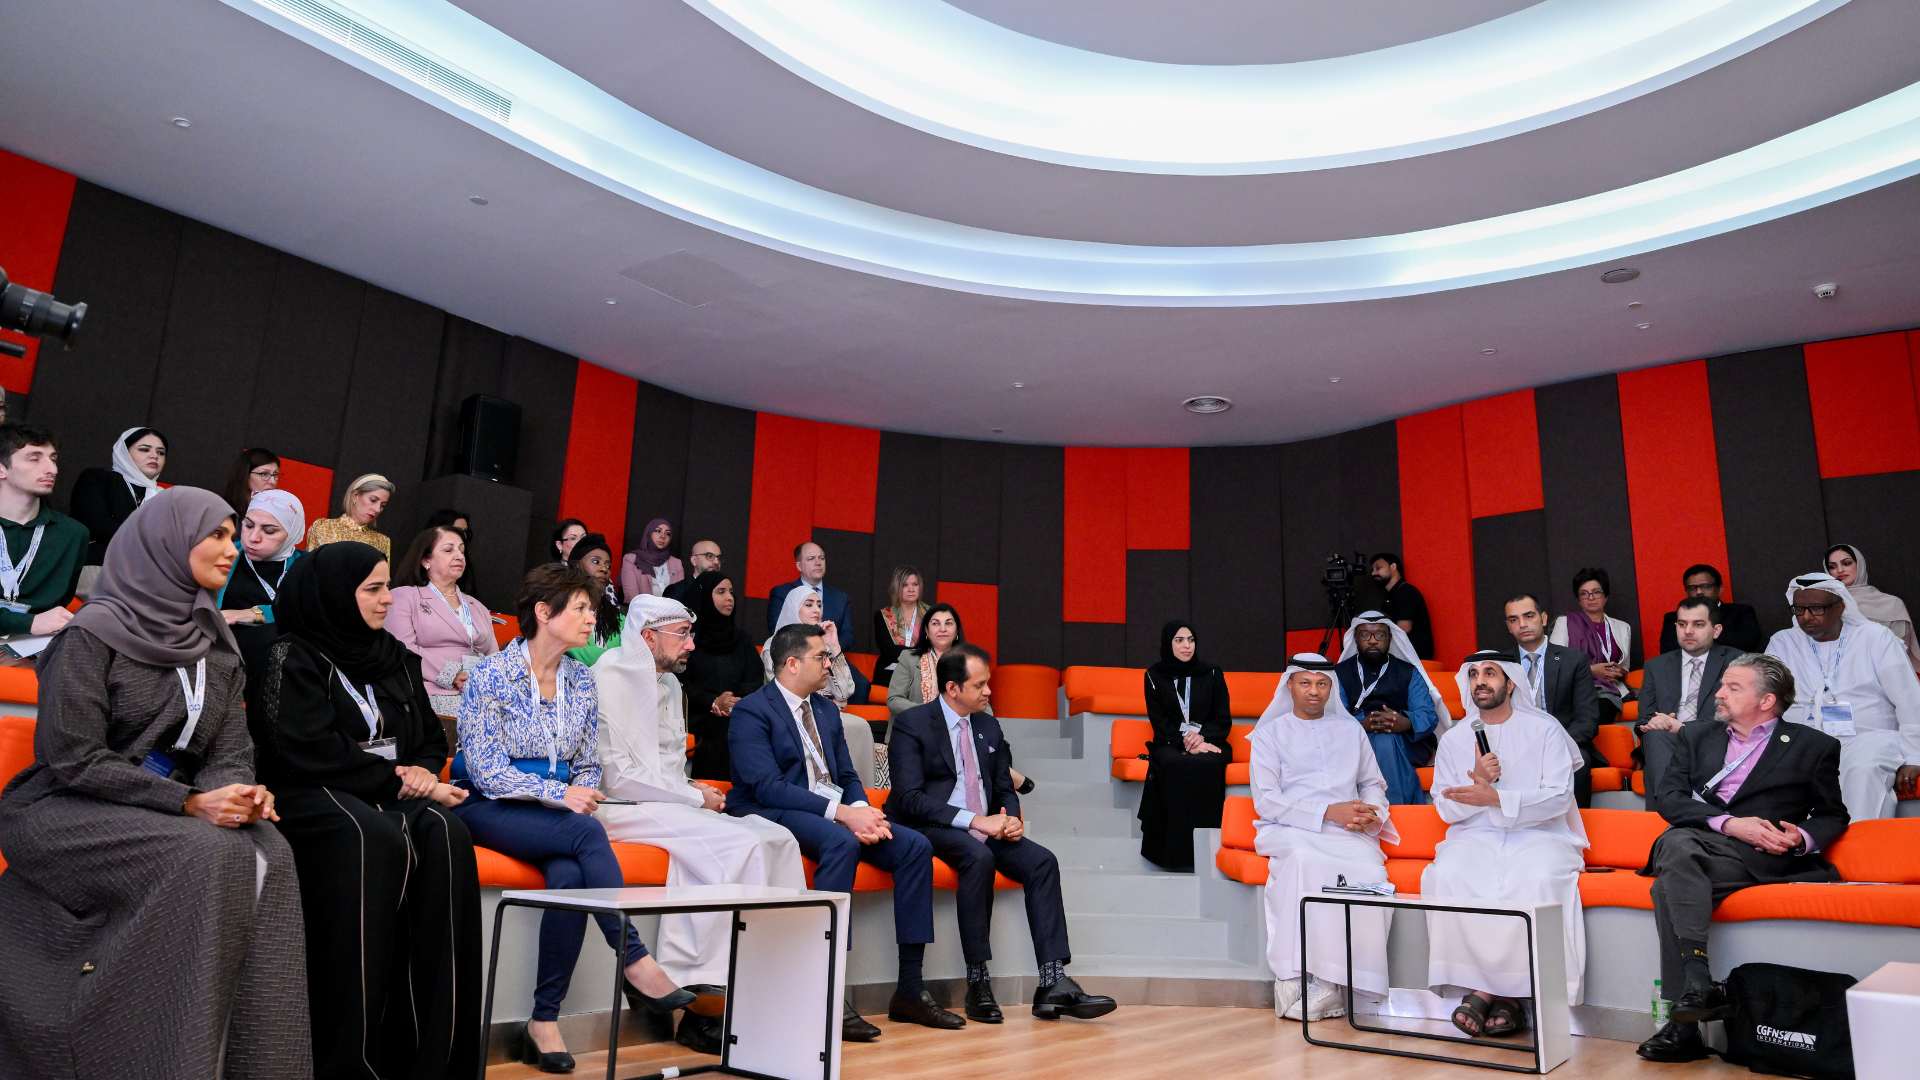 Integration of Technology, Connectivity, Research is Leading Abu Dhabi to be a Global Life Sciences Hub,’ say Healthcare Leaders